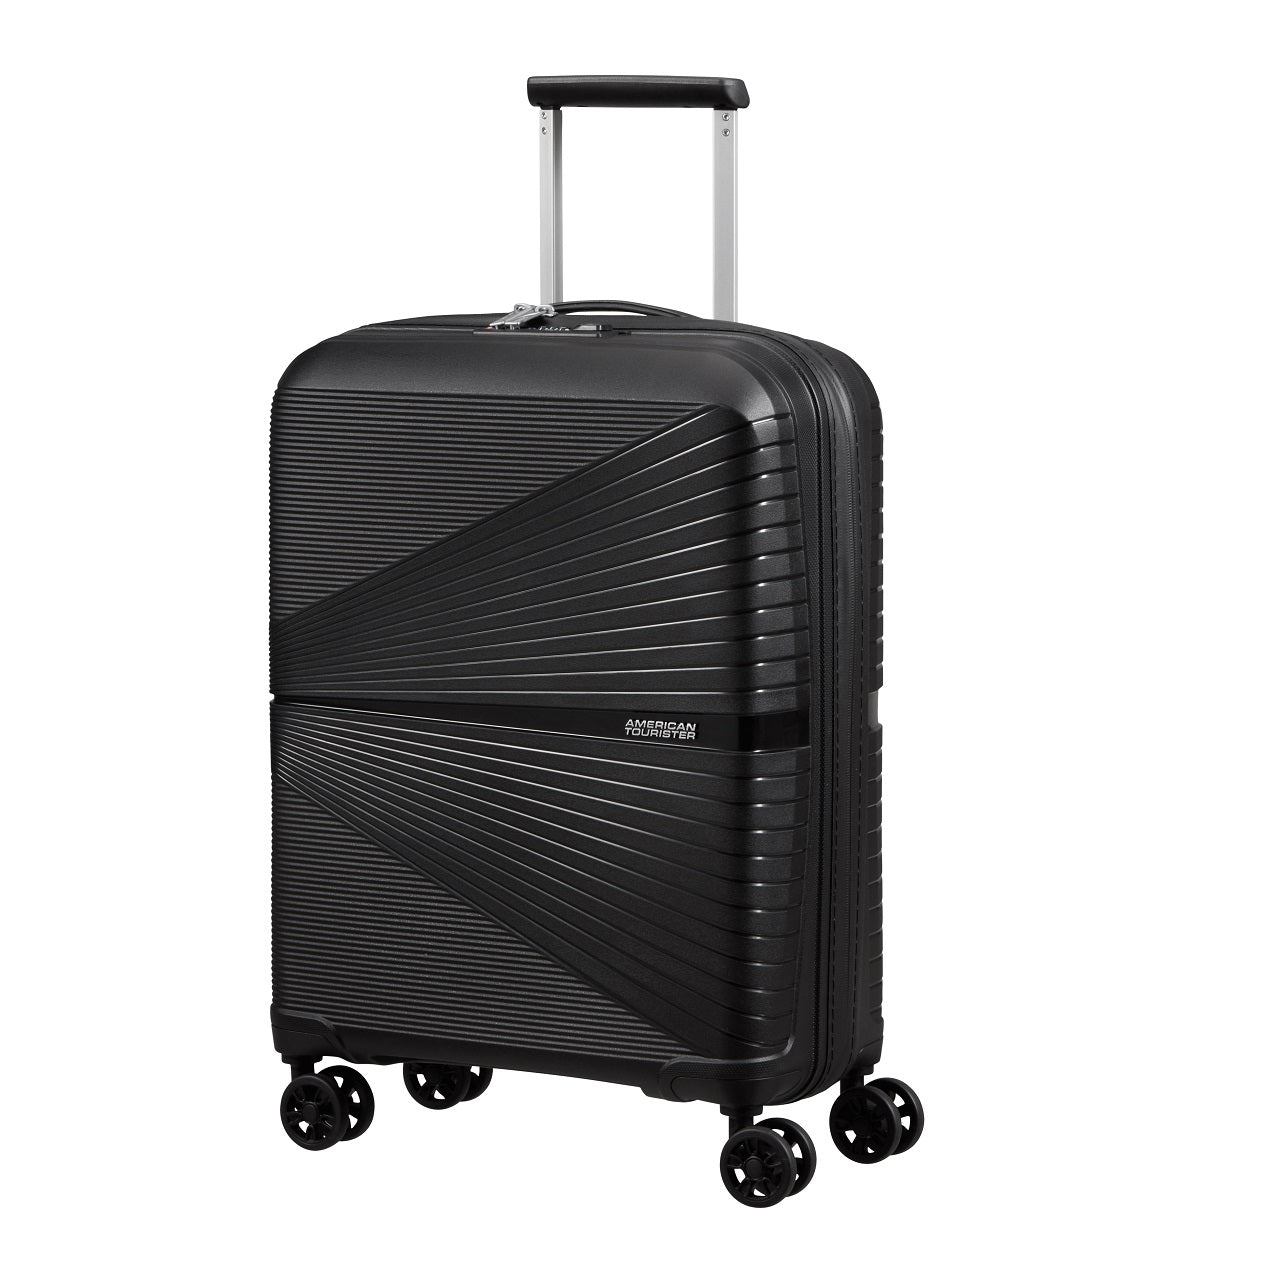 American Tourister - Airconic 55cm Small 4 Wheel Hard Suitcase - Black